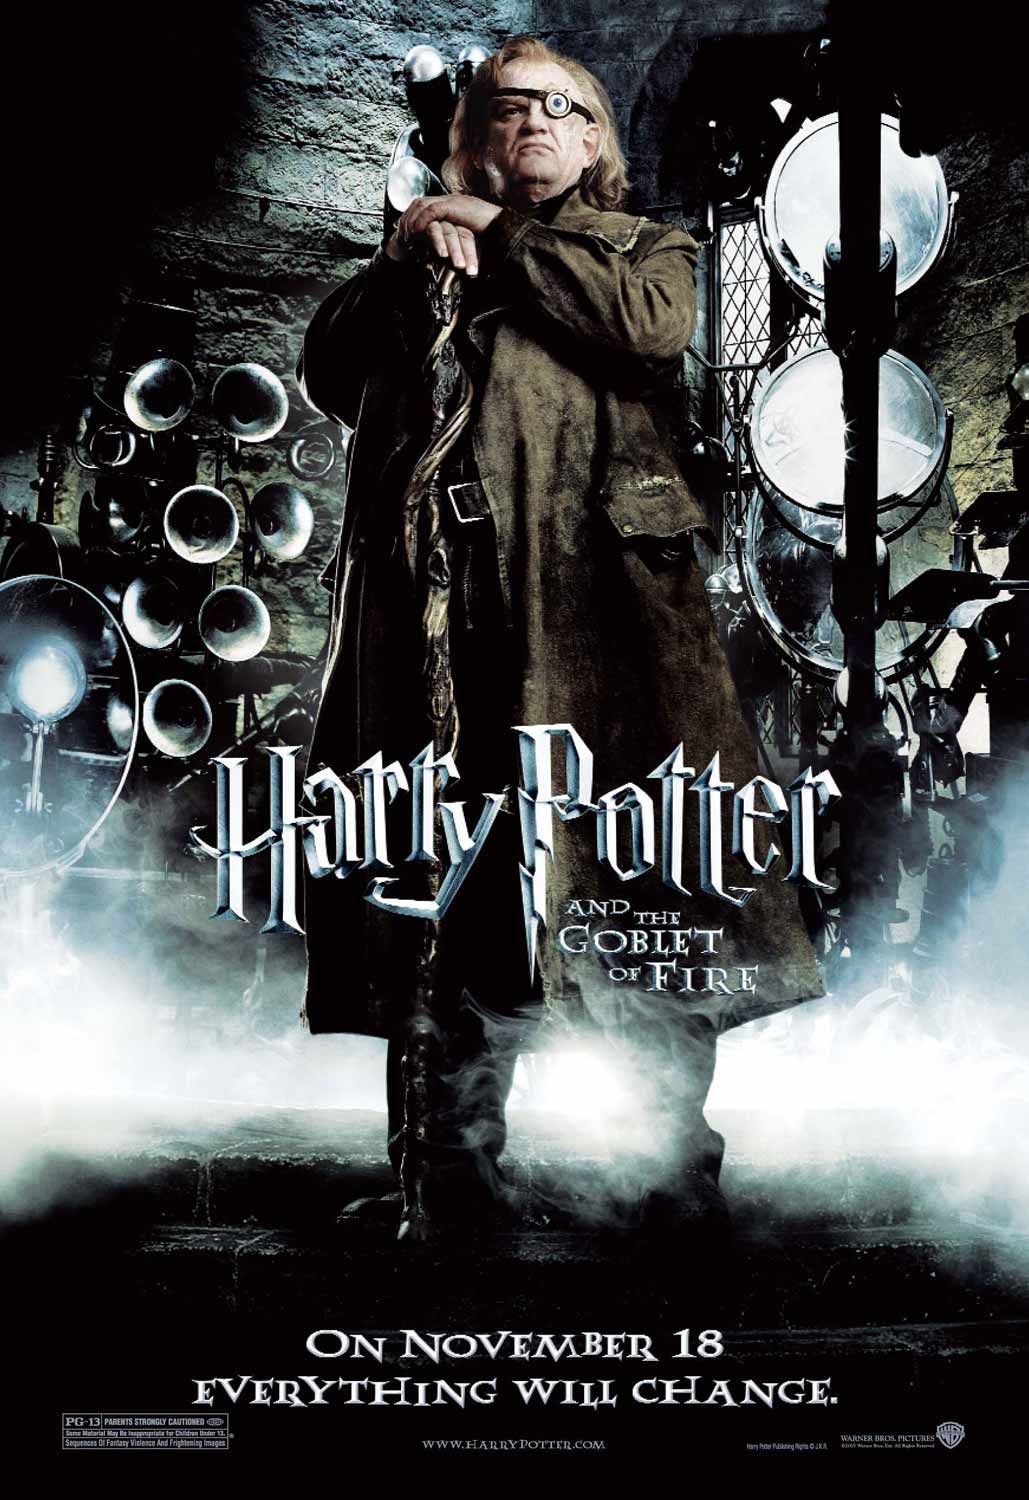 Extra Large Movie Poster Image for Harry Potter and the Goblet of Fire (#16 of 31)